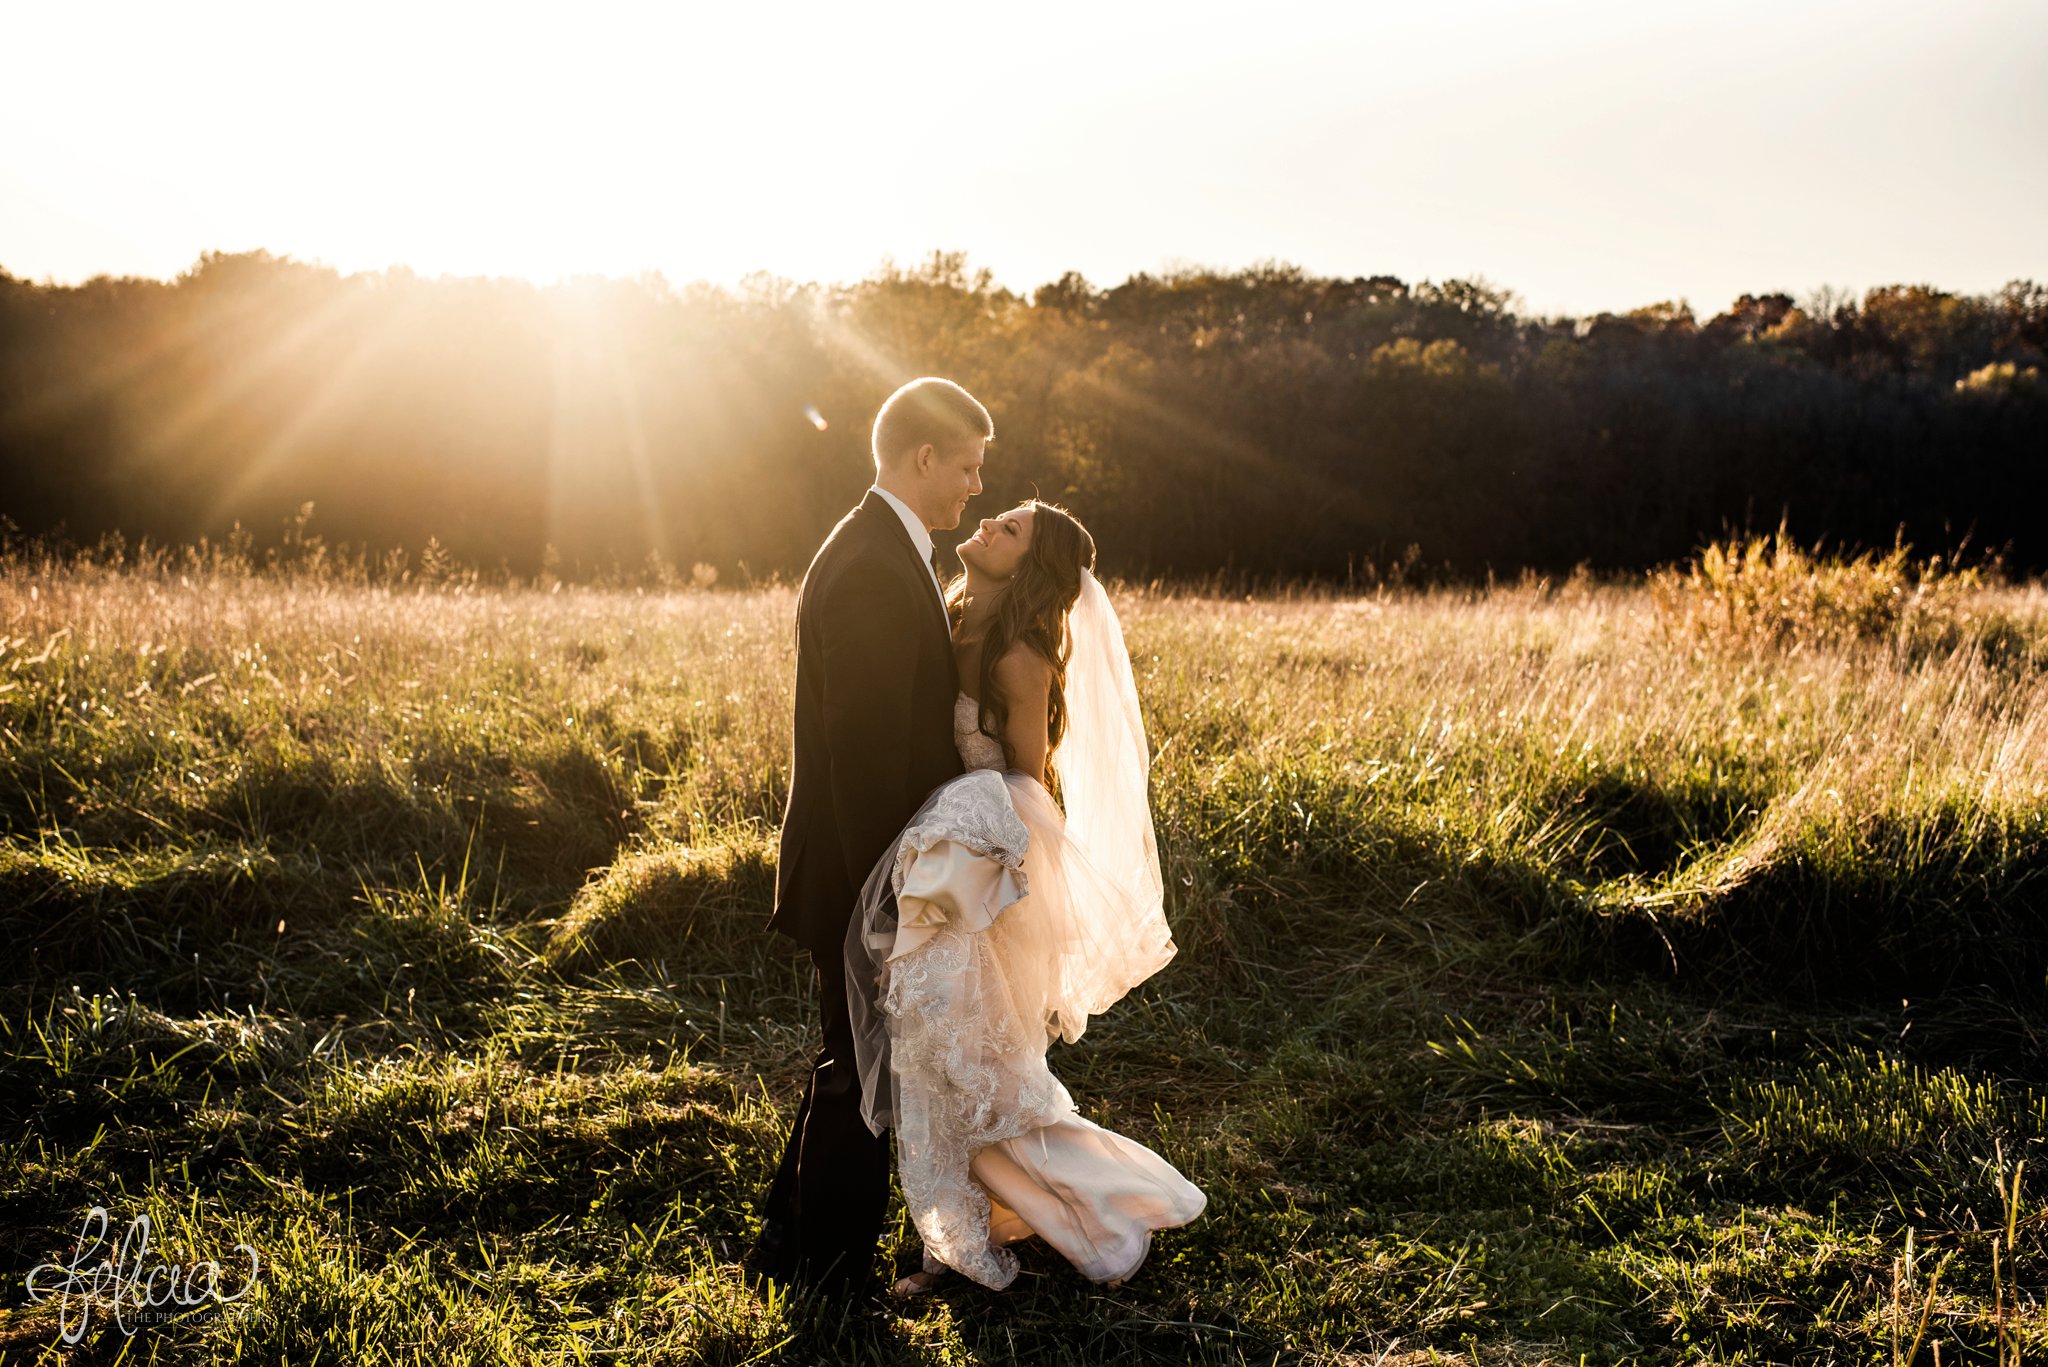 wedding | wedding photos | Rumely Event Space | wedding photography | images by feliciathephotographer.com | field background | nature | bride and groom portraits | sunlight | romantic sun | sun flare | care free | billowing dress | smiling | candid 